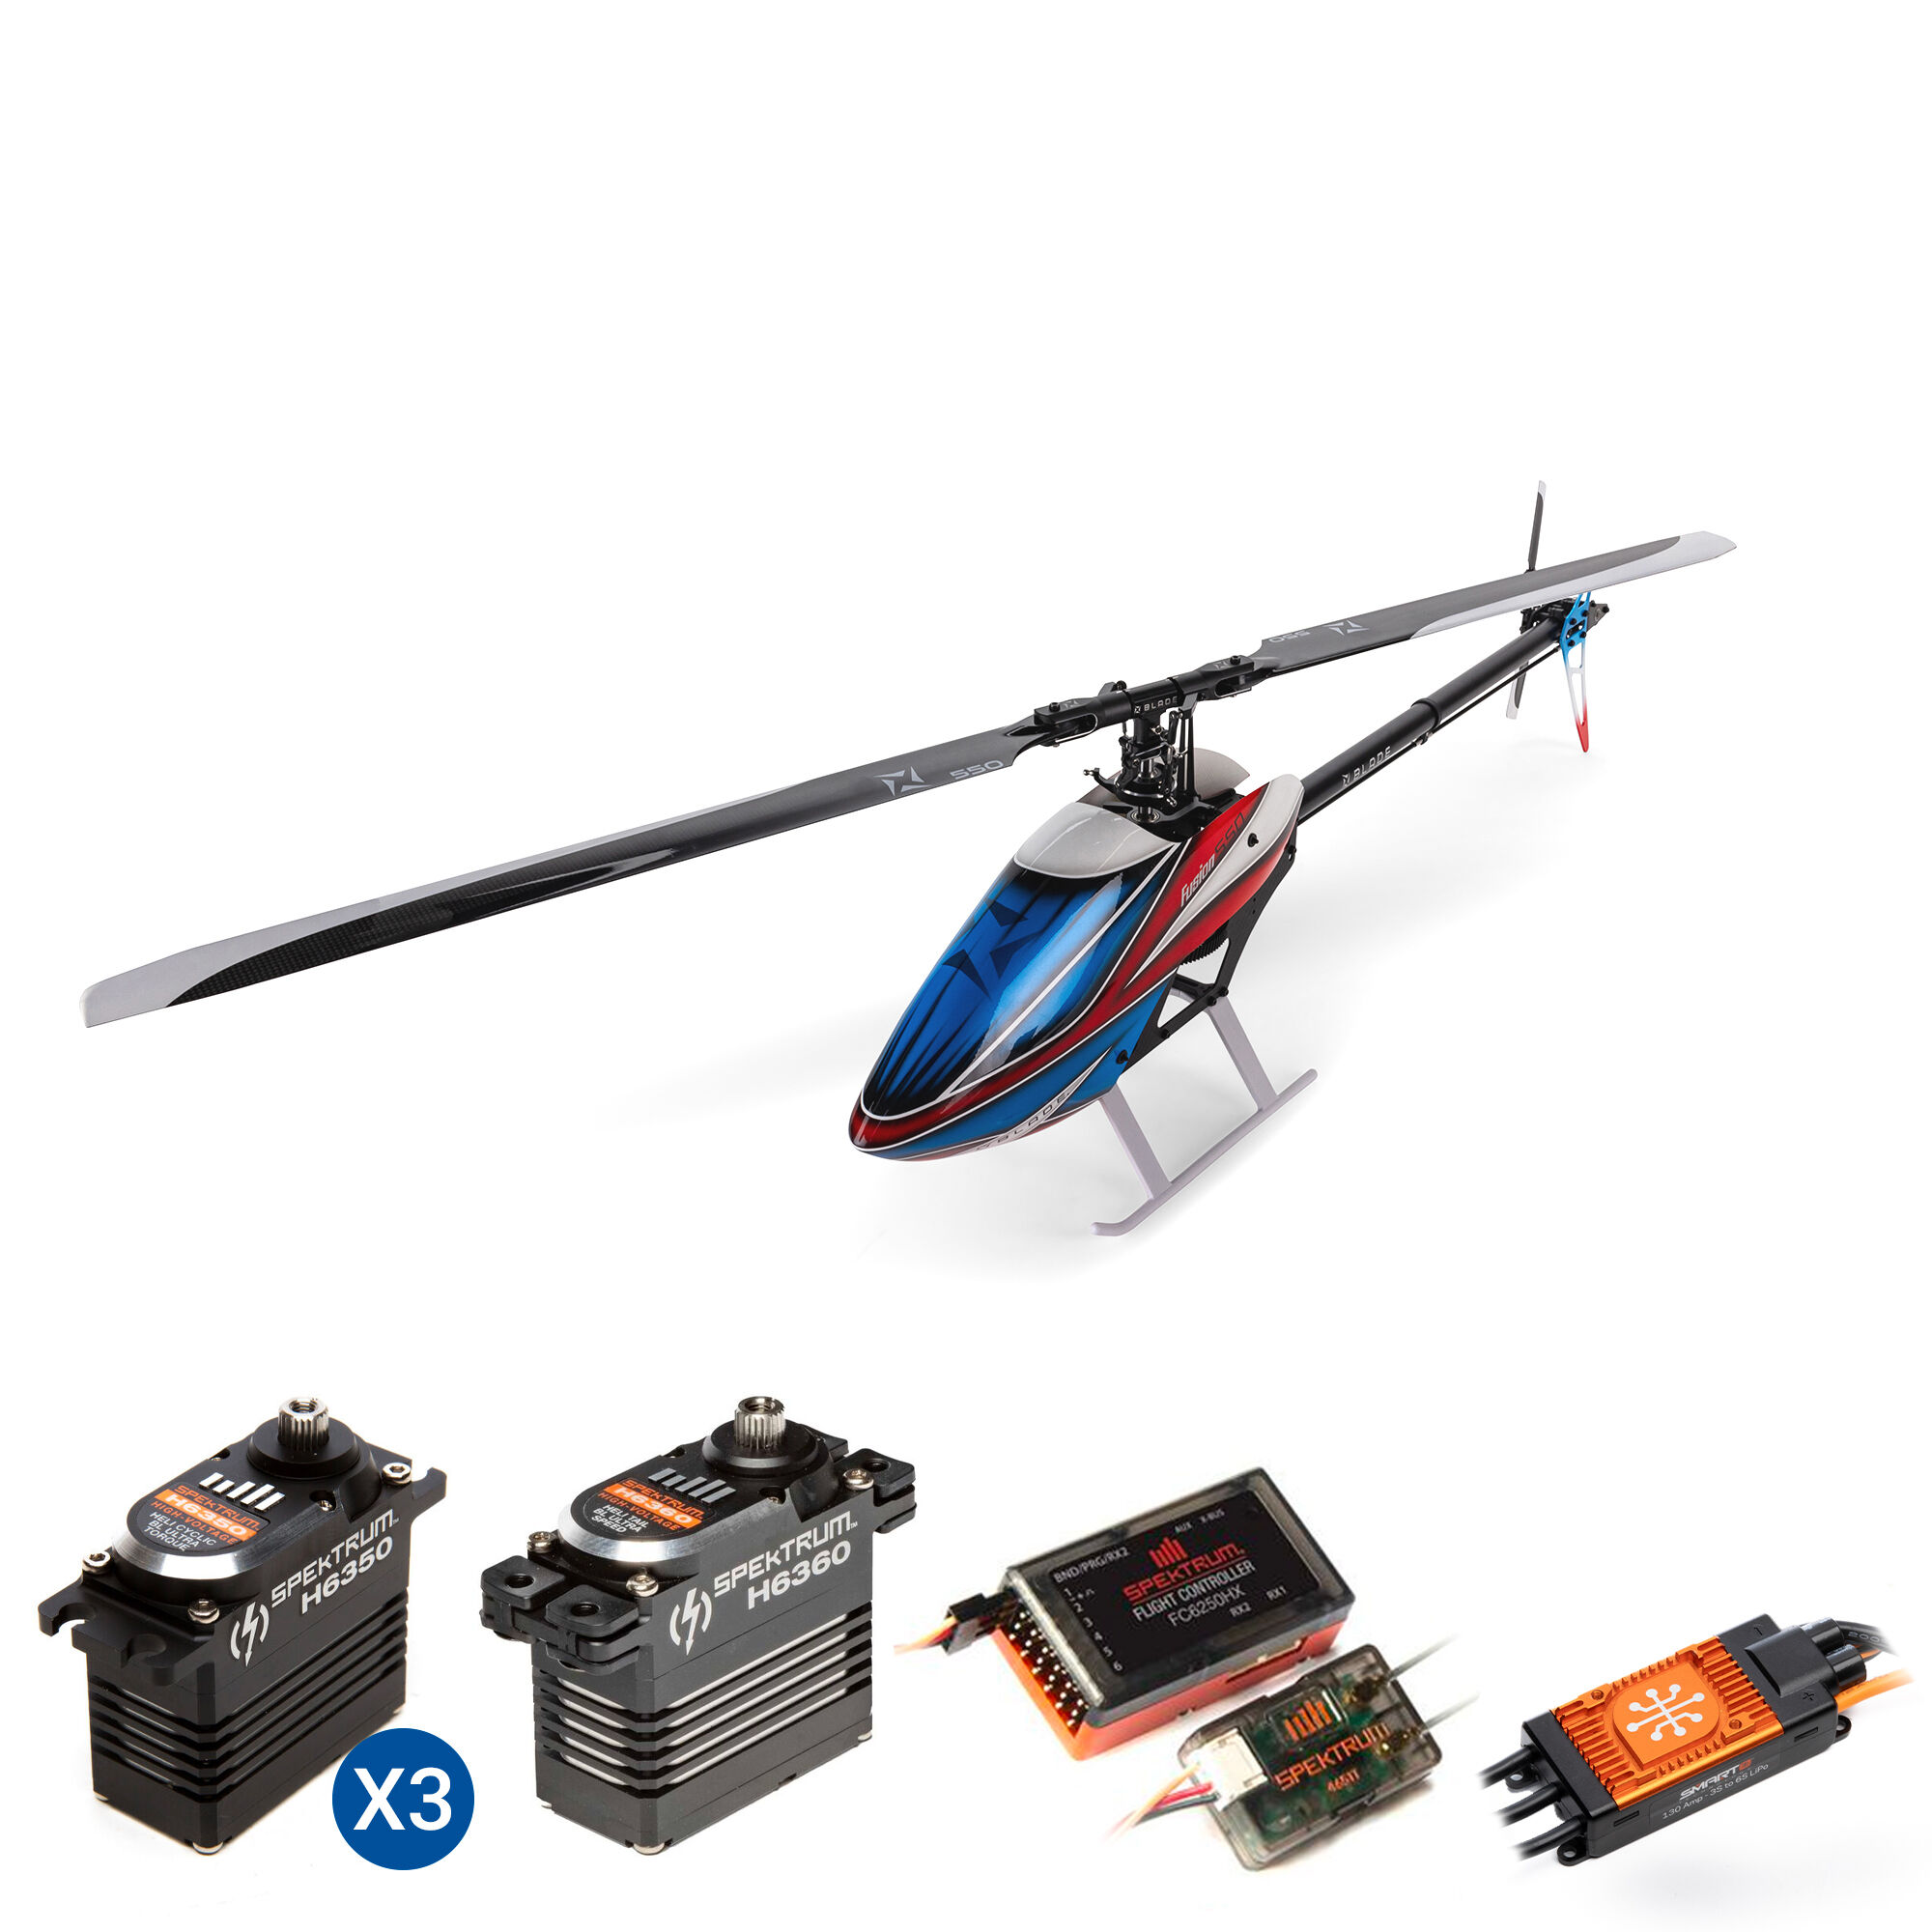 Blade RC Helicopter Kits | Blade Helis